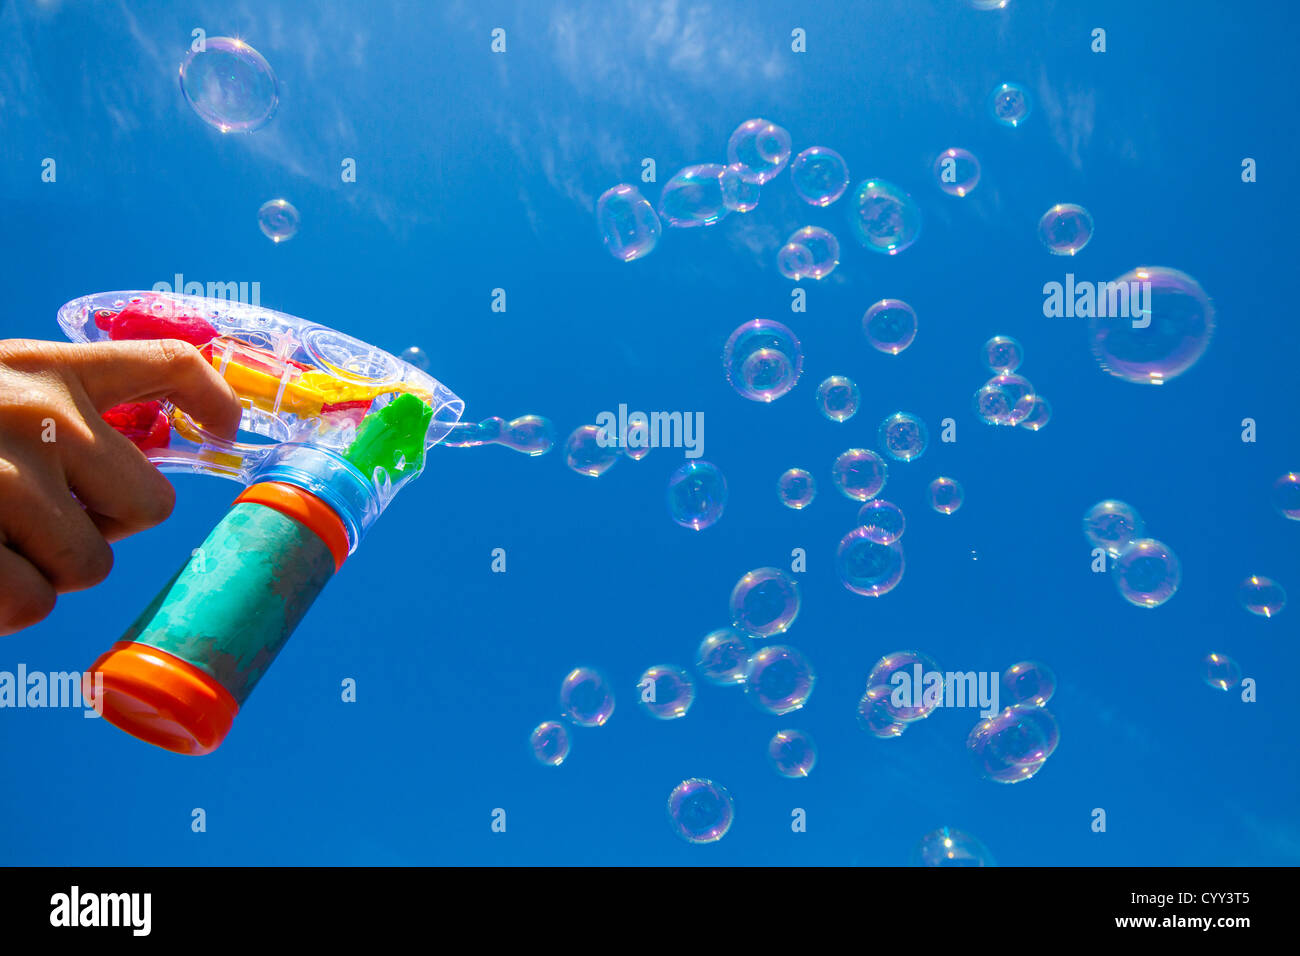 Soap bubbles. Air is blowing through a ring, covered with soapy water. Made with a children toy, a soap bubble machine. Stock Photo